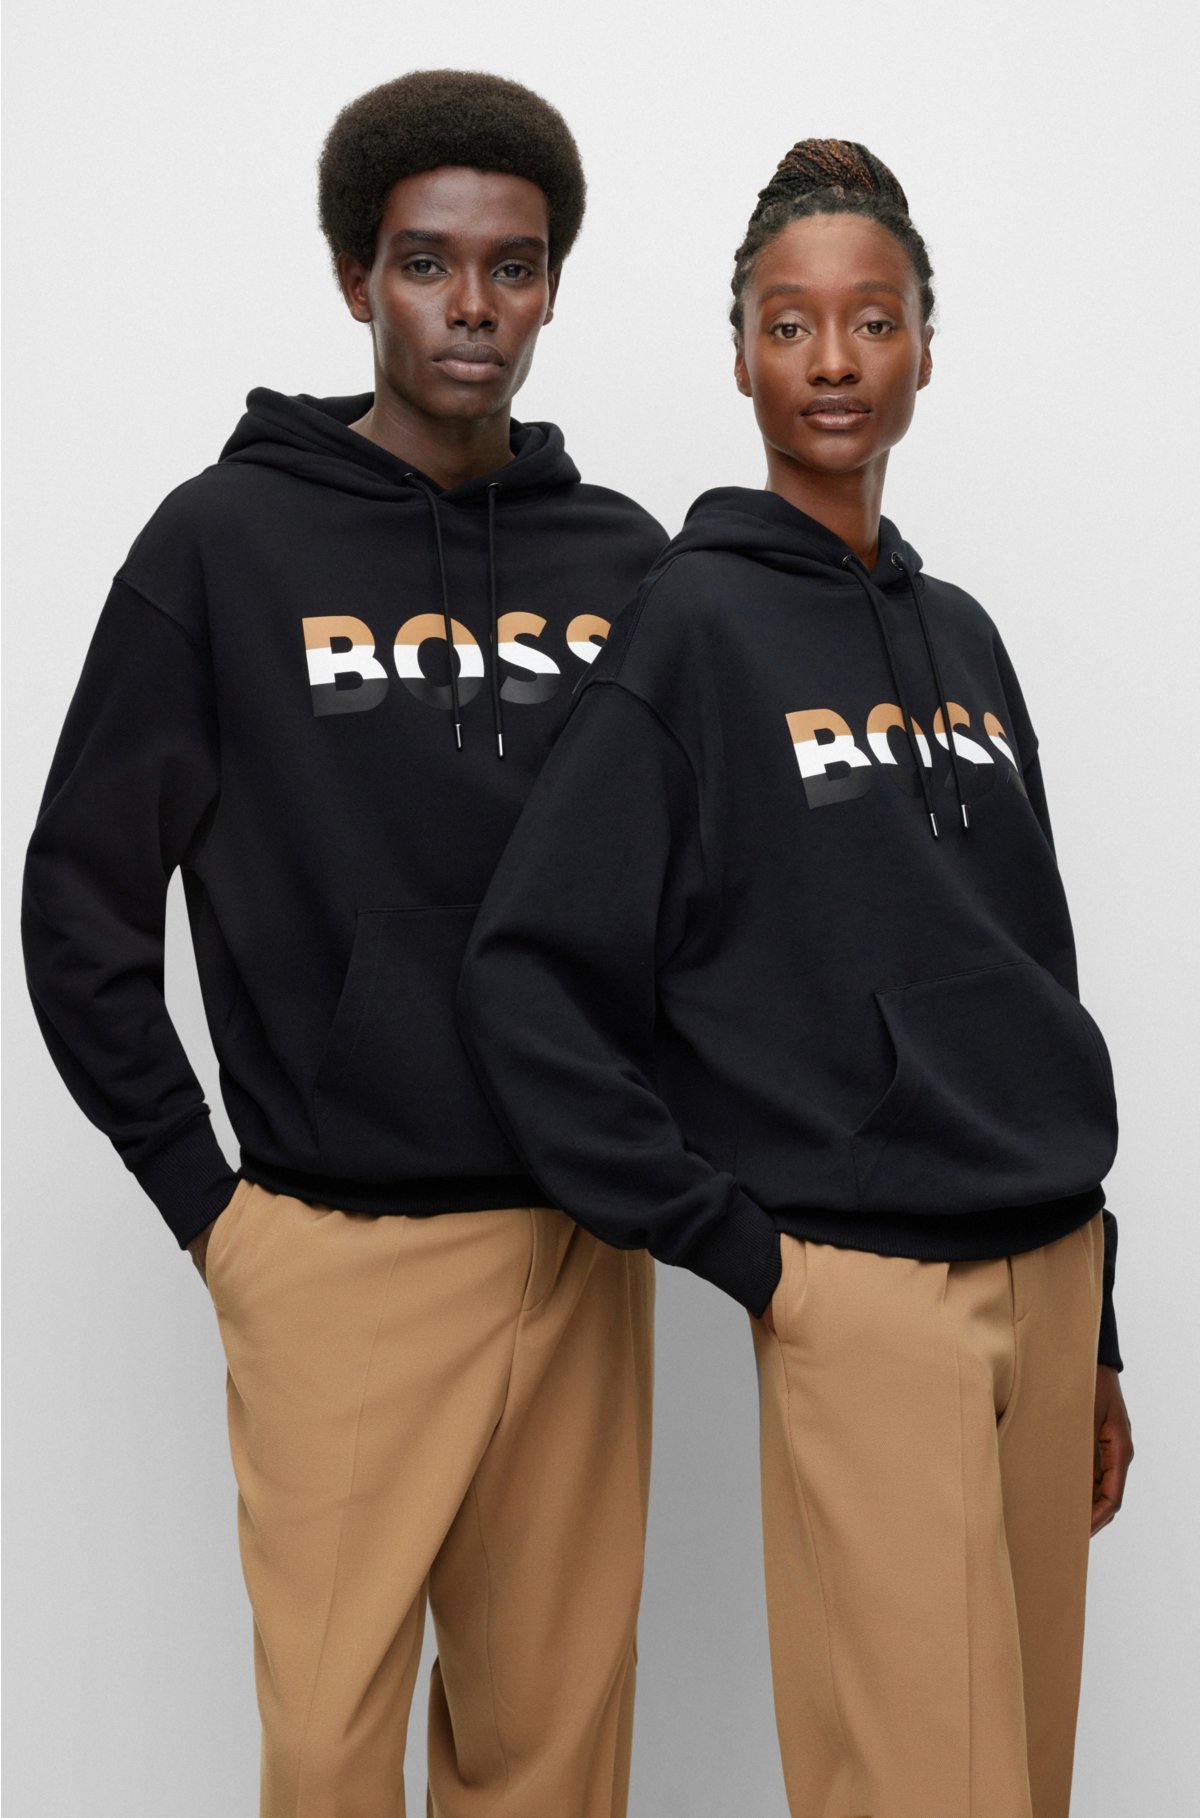 Unisex hoodie relaxed-fit cotton - in BOSS